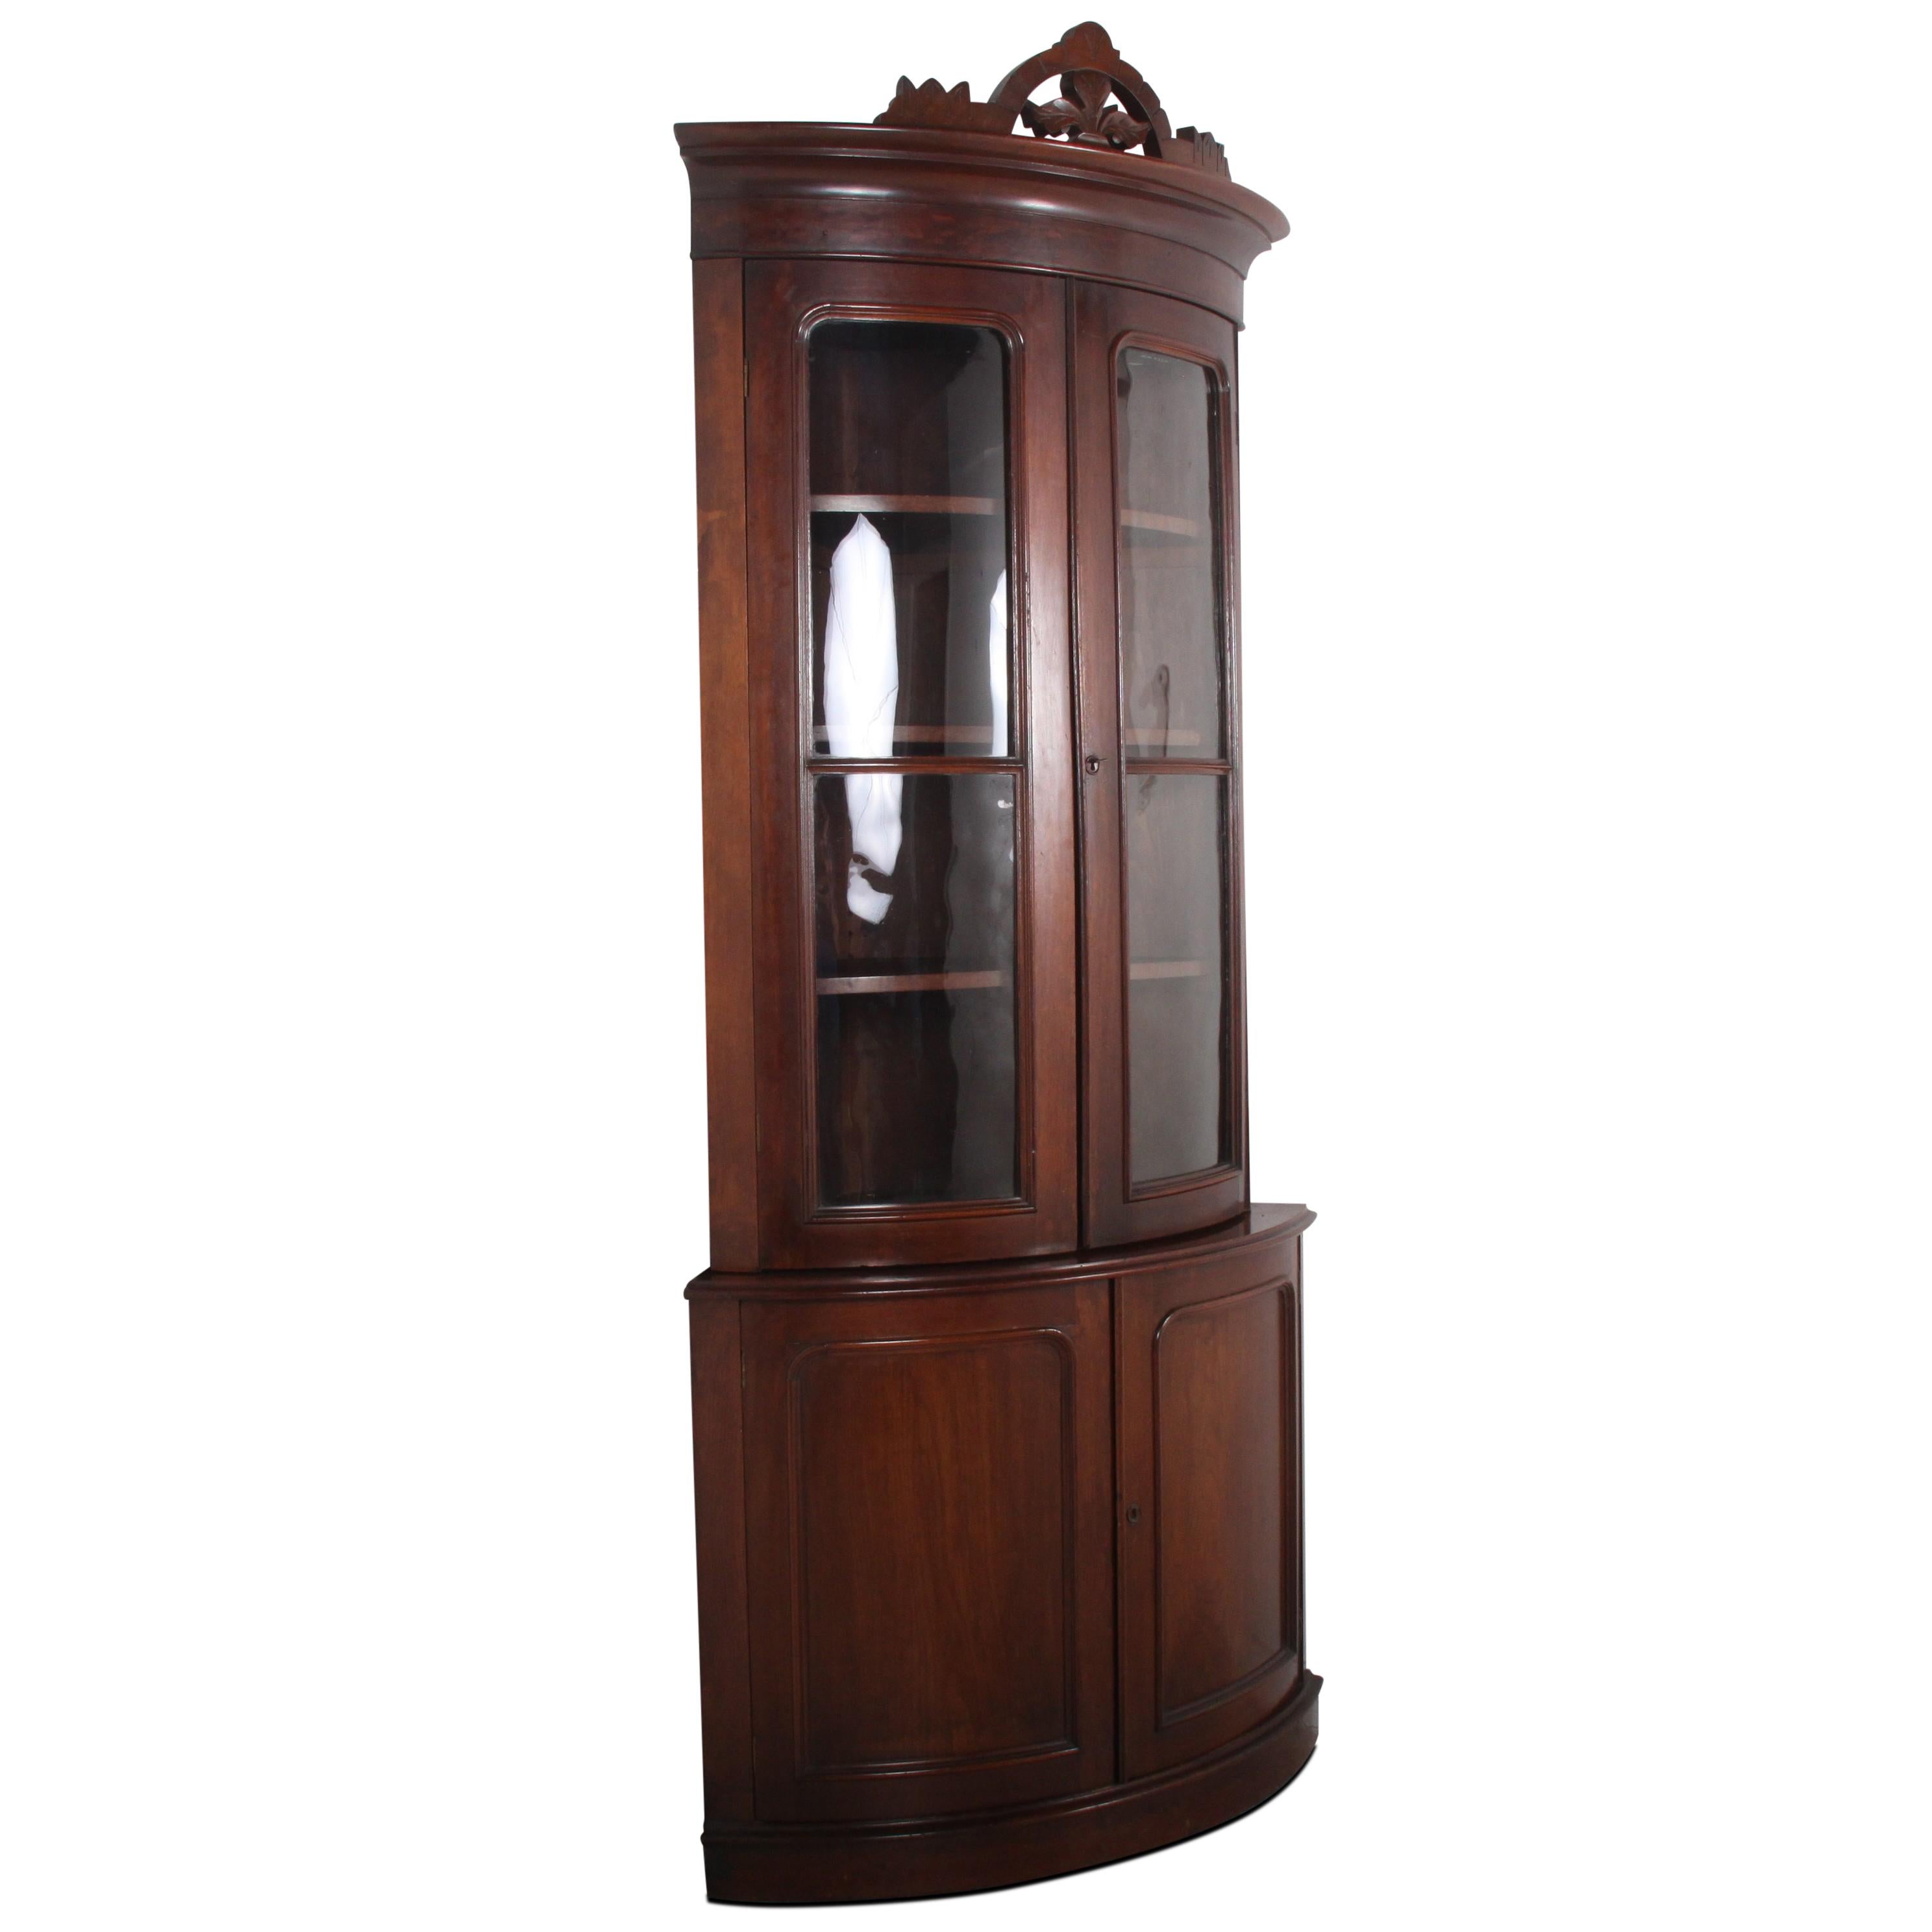 A Victorian bow-front corner cabinet in walnut, the top with three shelves behind original curved glass doors and with lower storage behind a pair of curved- panelled doors. Original carved accent piece on crown is removable if the buyer prefers a